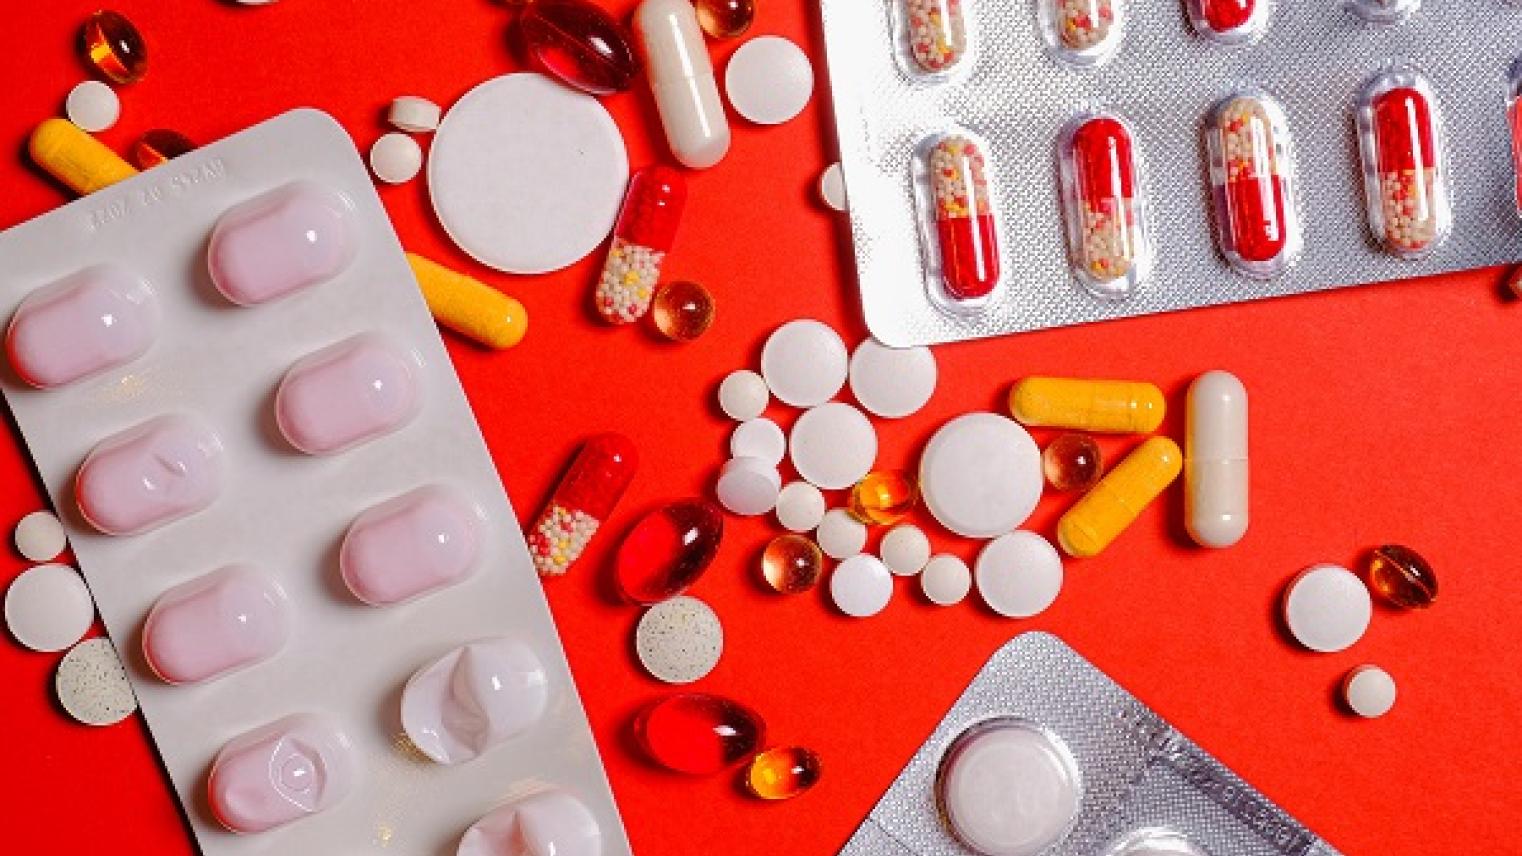 Image of medications by Anna Shvets from https://www.pexels.com/photo/white-and-red-medication-pill-blister-pack-3683086/ 